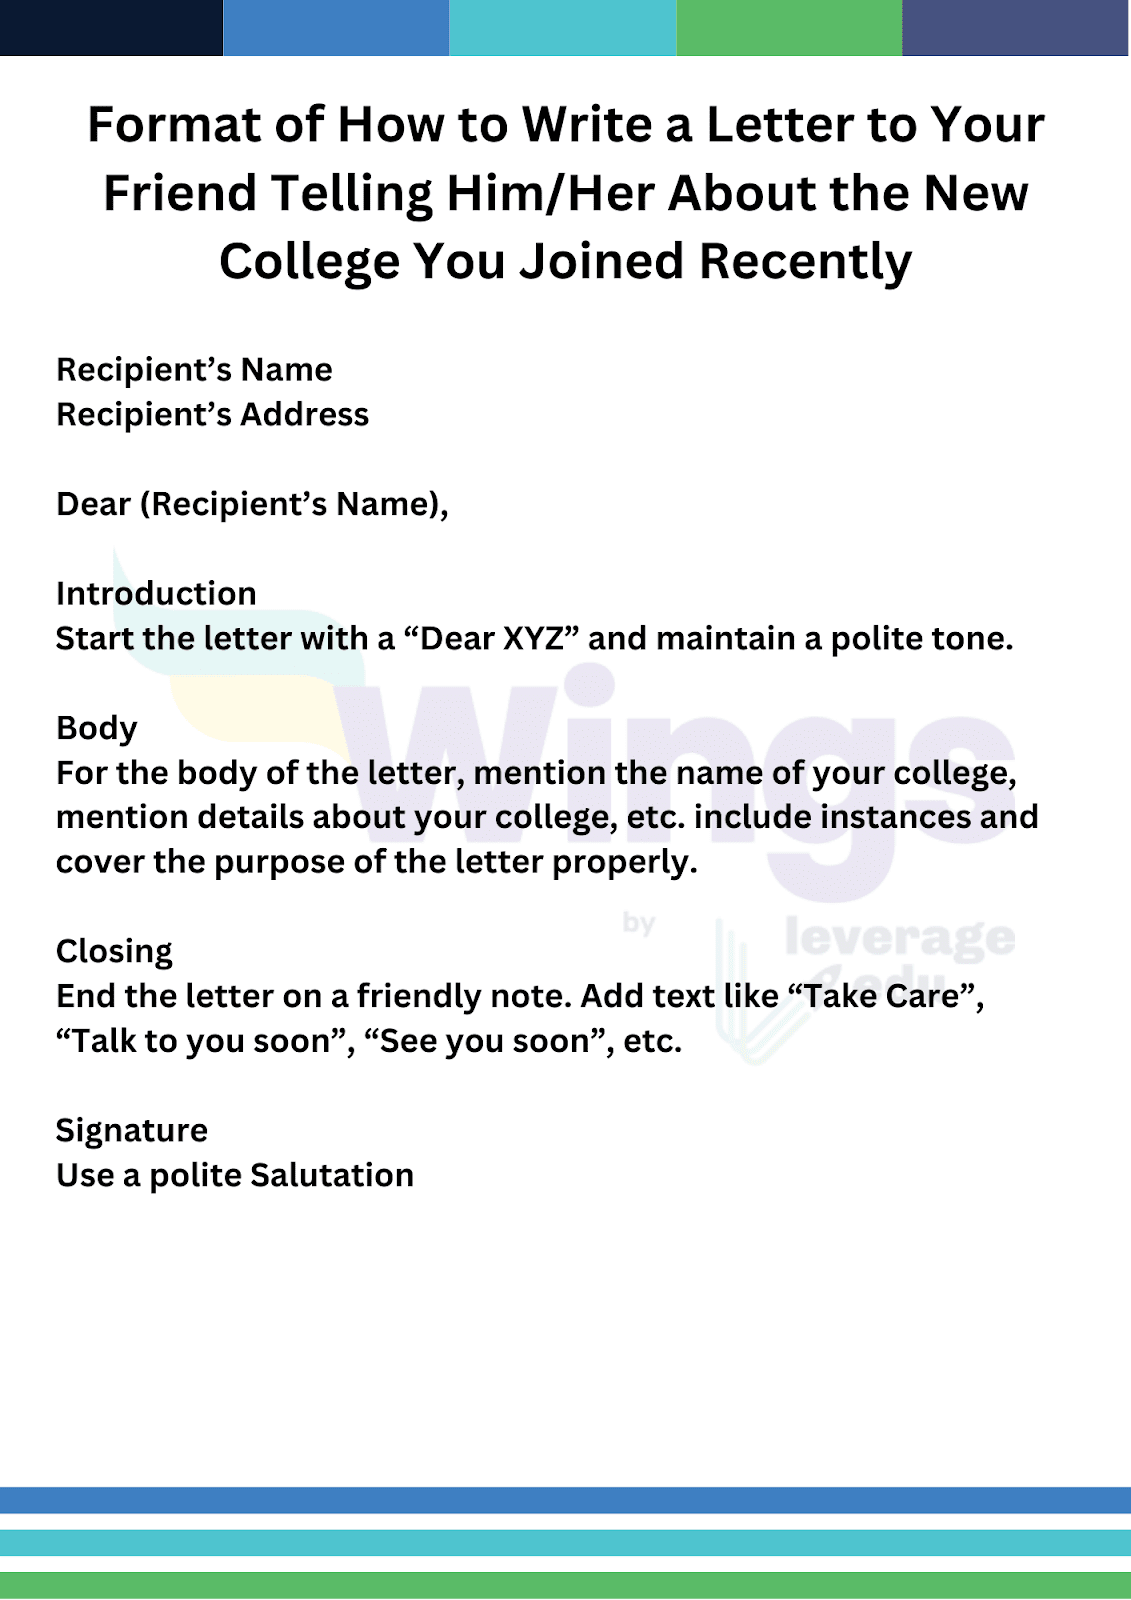 Write a Letter to Your Friend Telling Him/Her About the New College You Joined Recently     